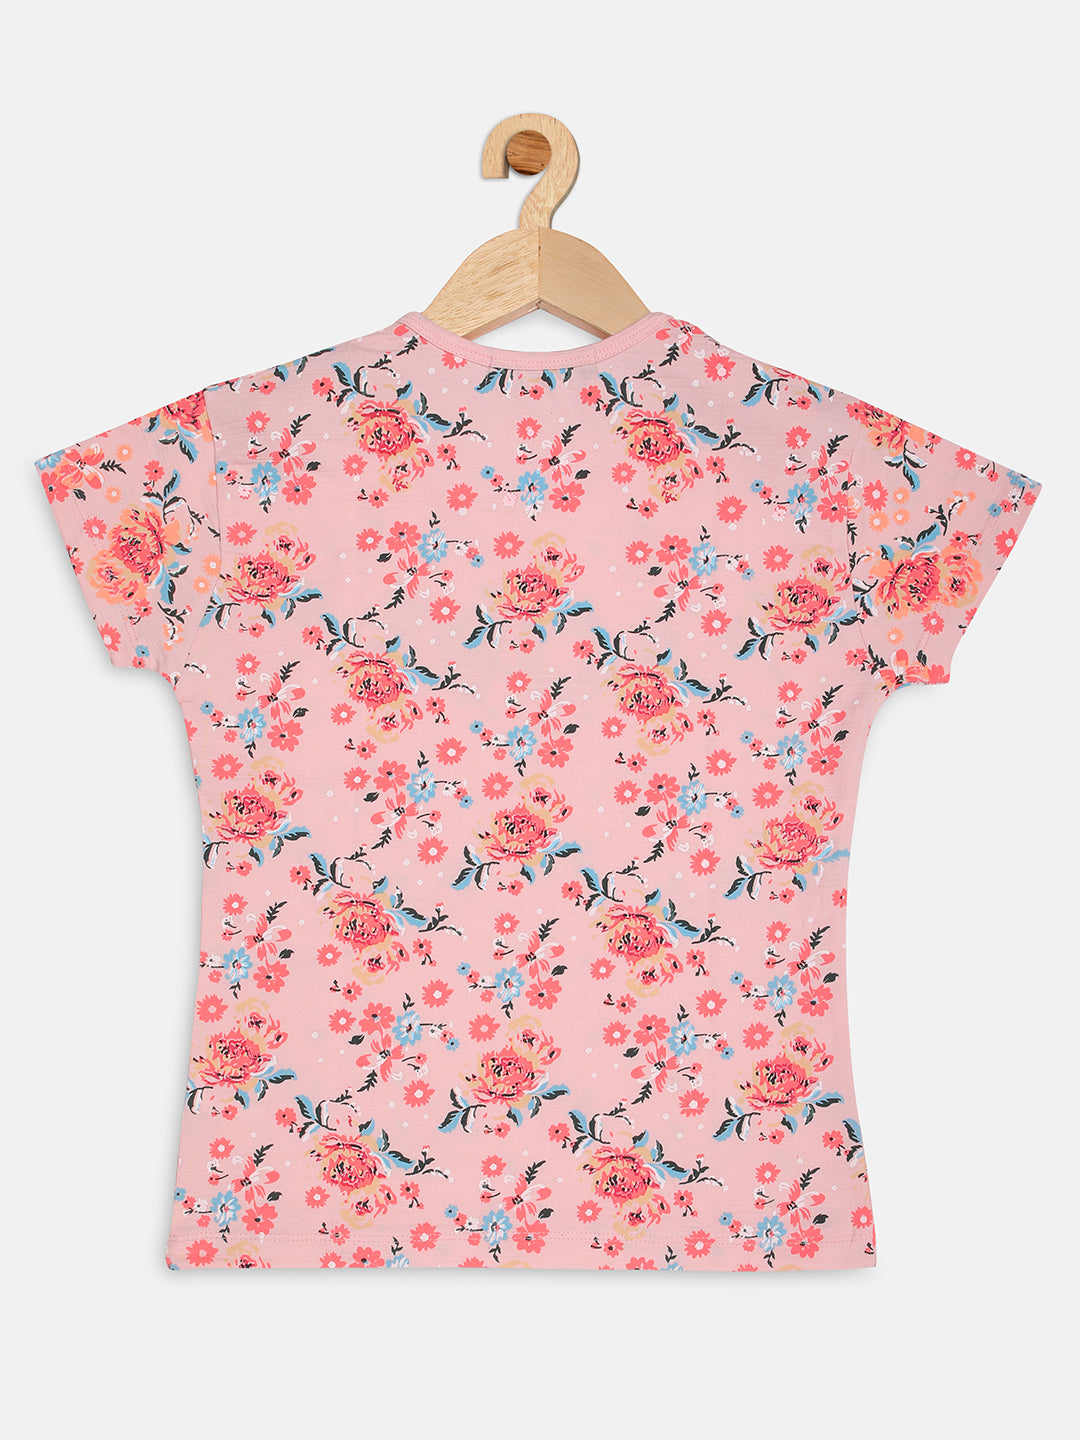 Pampolina  Girls Allover Floral Printed Tops-Pink